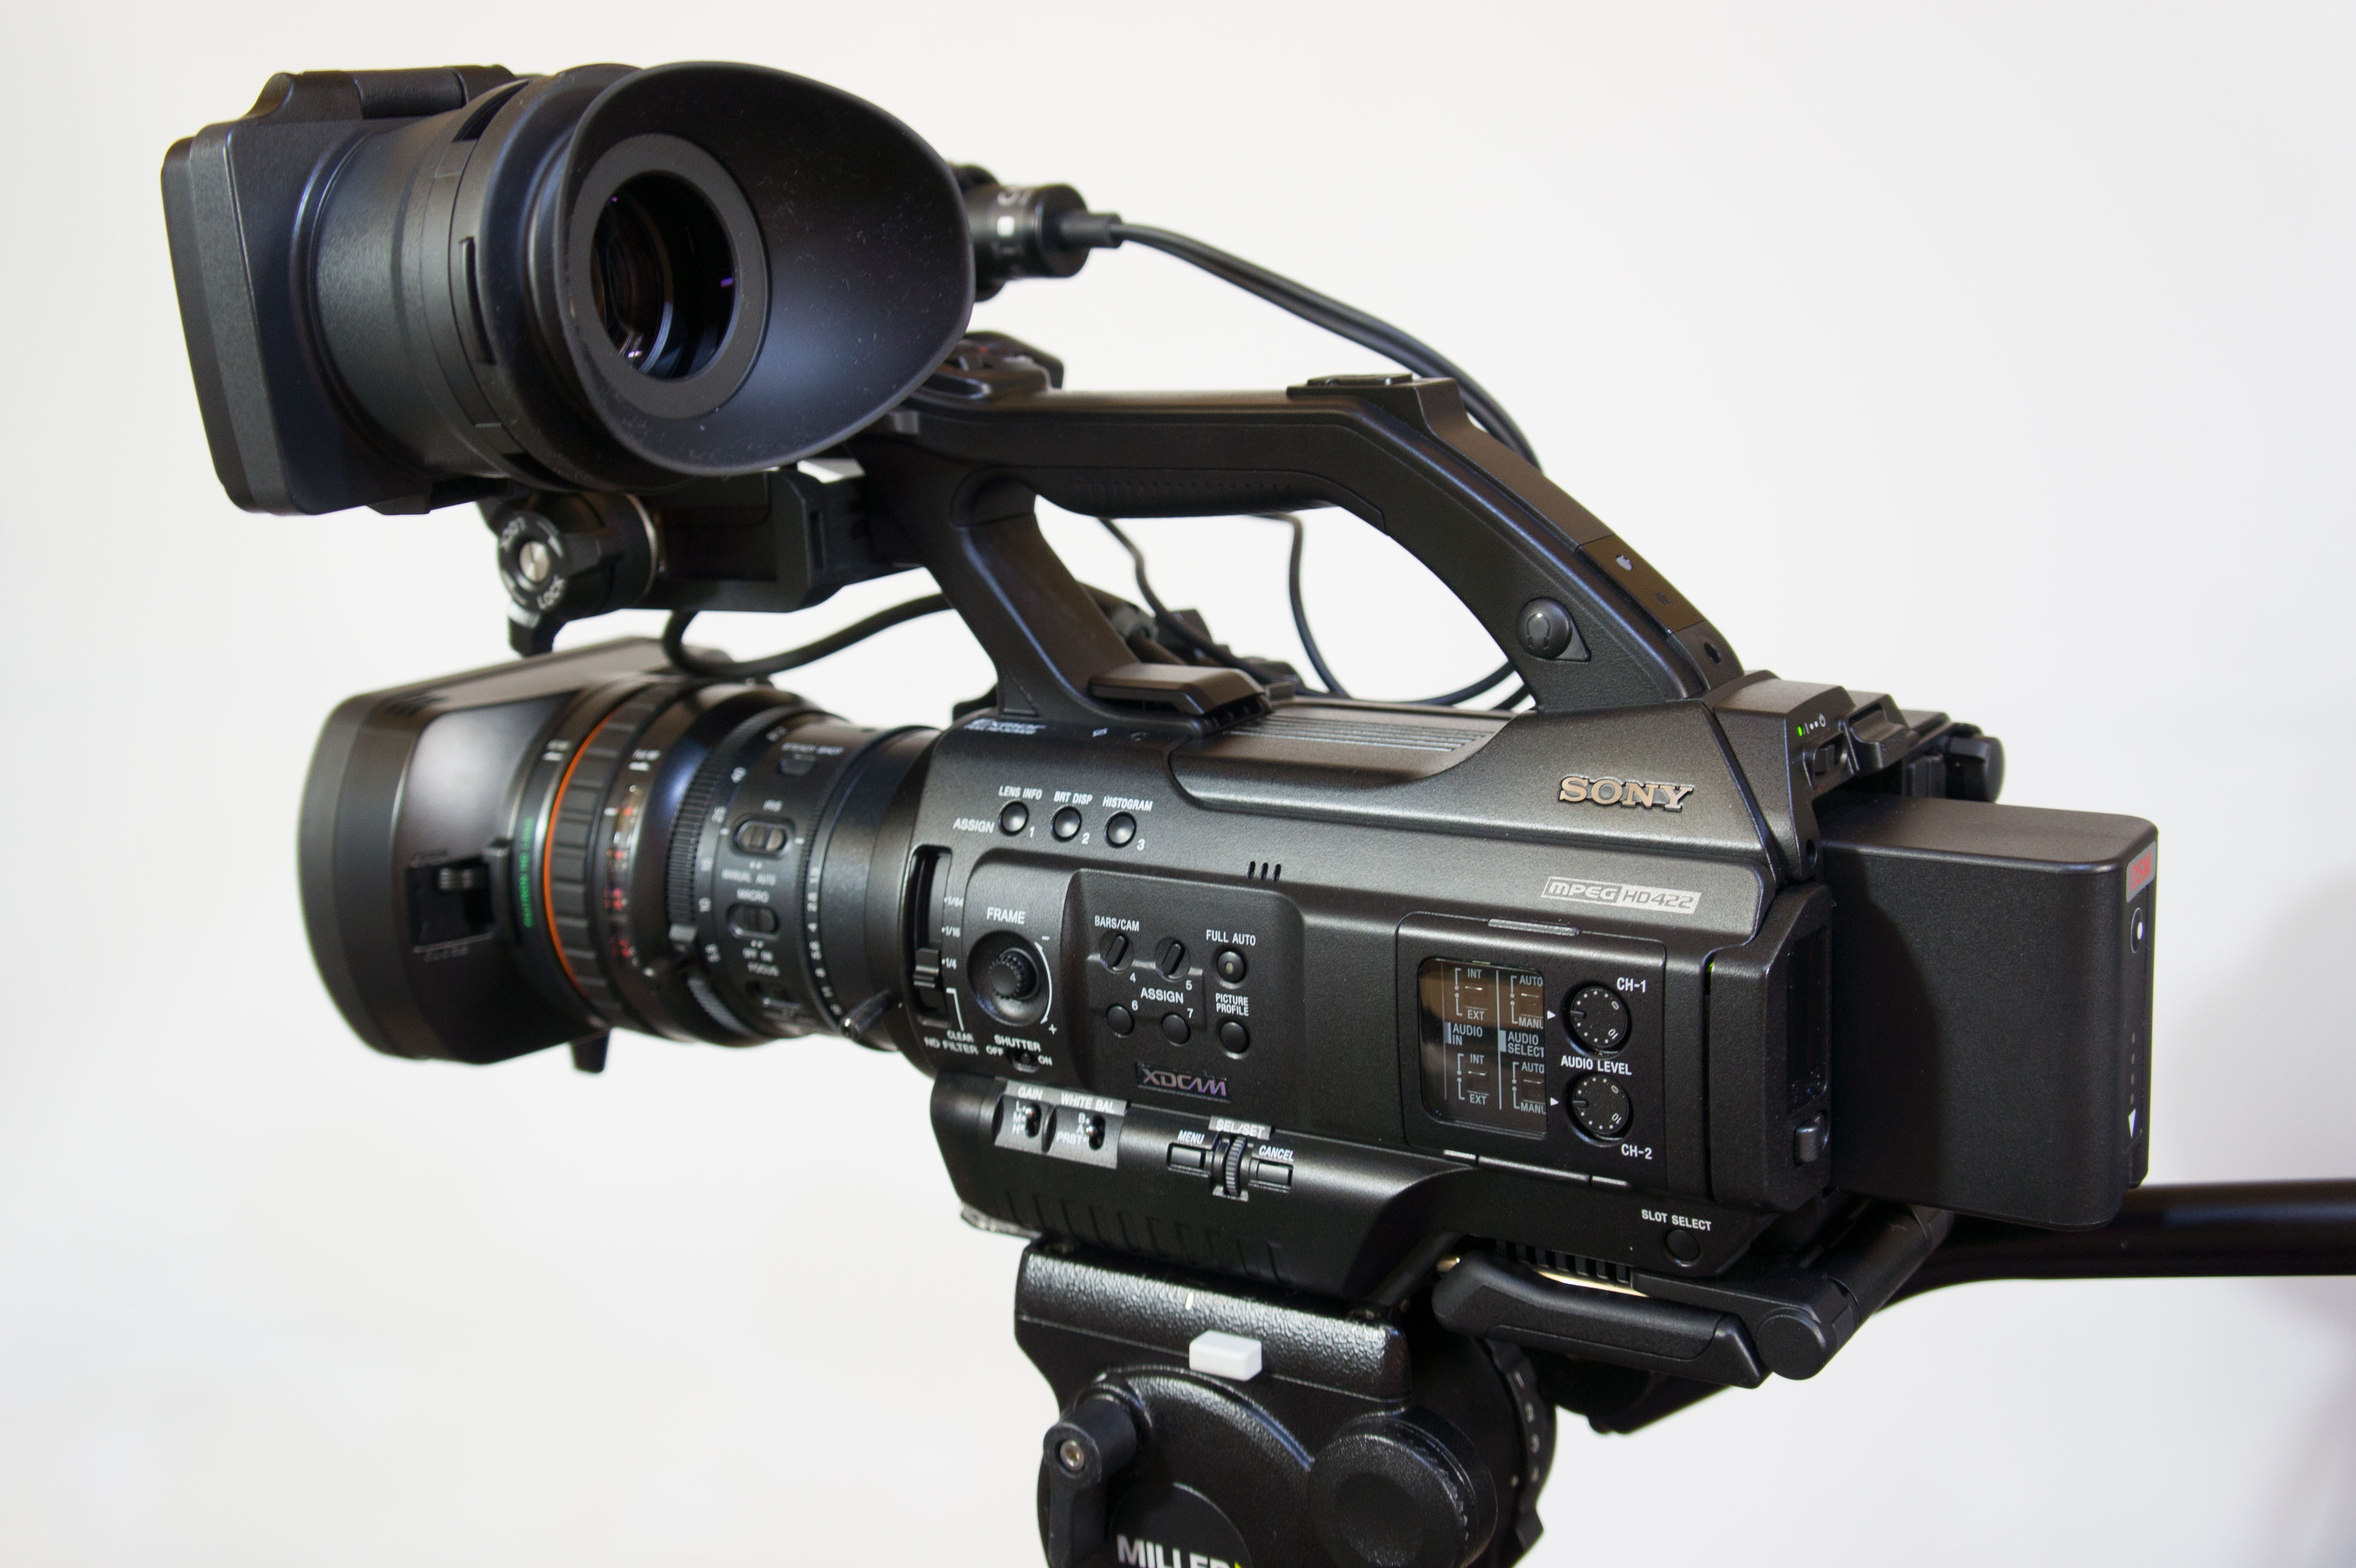 PMW-300-side | XDCAM-USER.COM by Alister Chapman